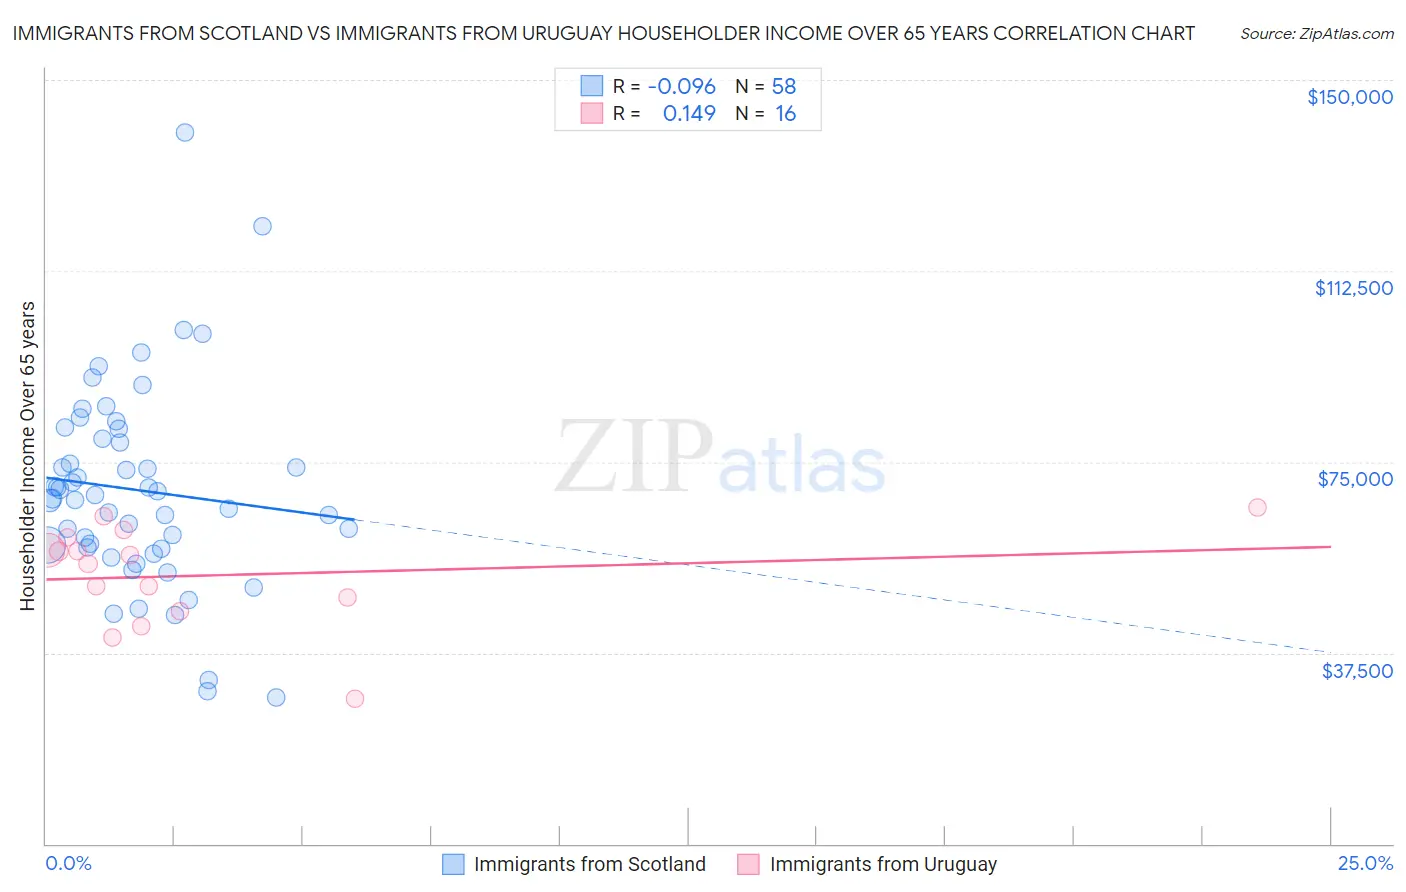 Immigrants from Scotland vs Immigrants from Uruguay Householder Income Over 65 years